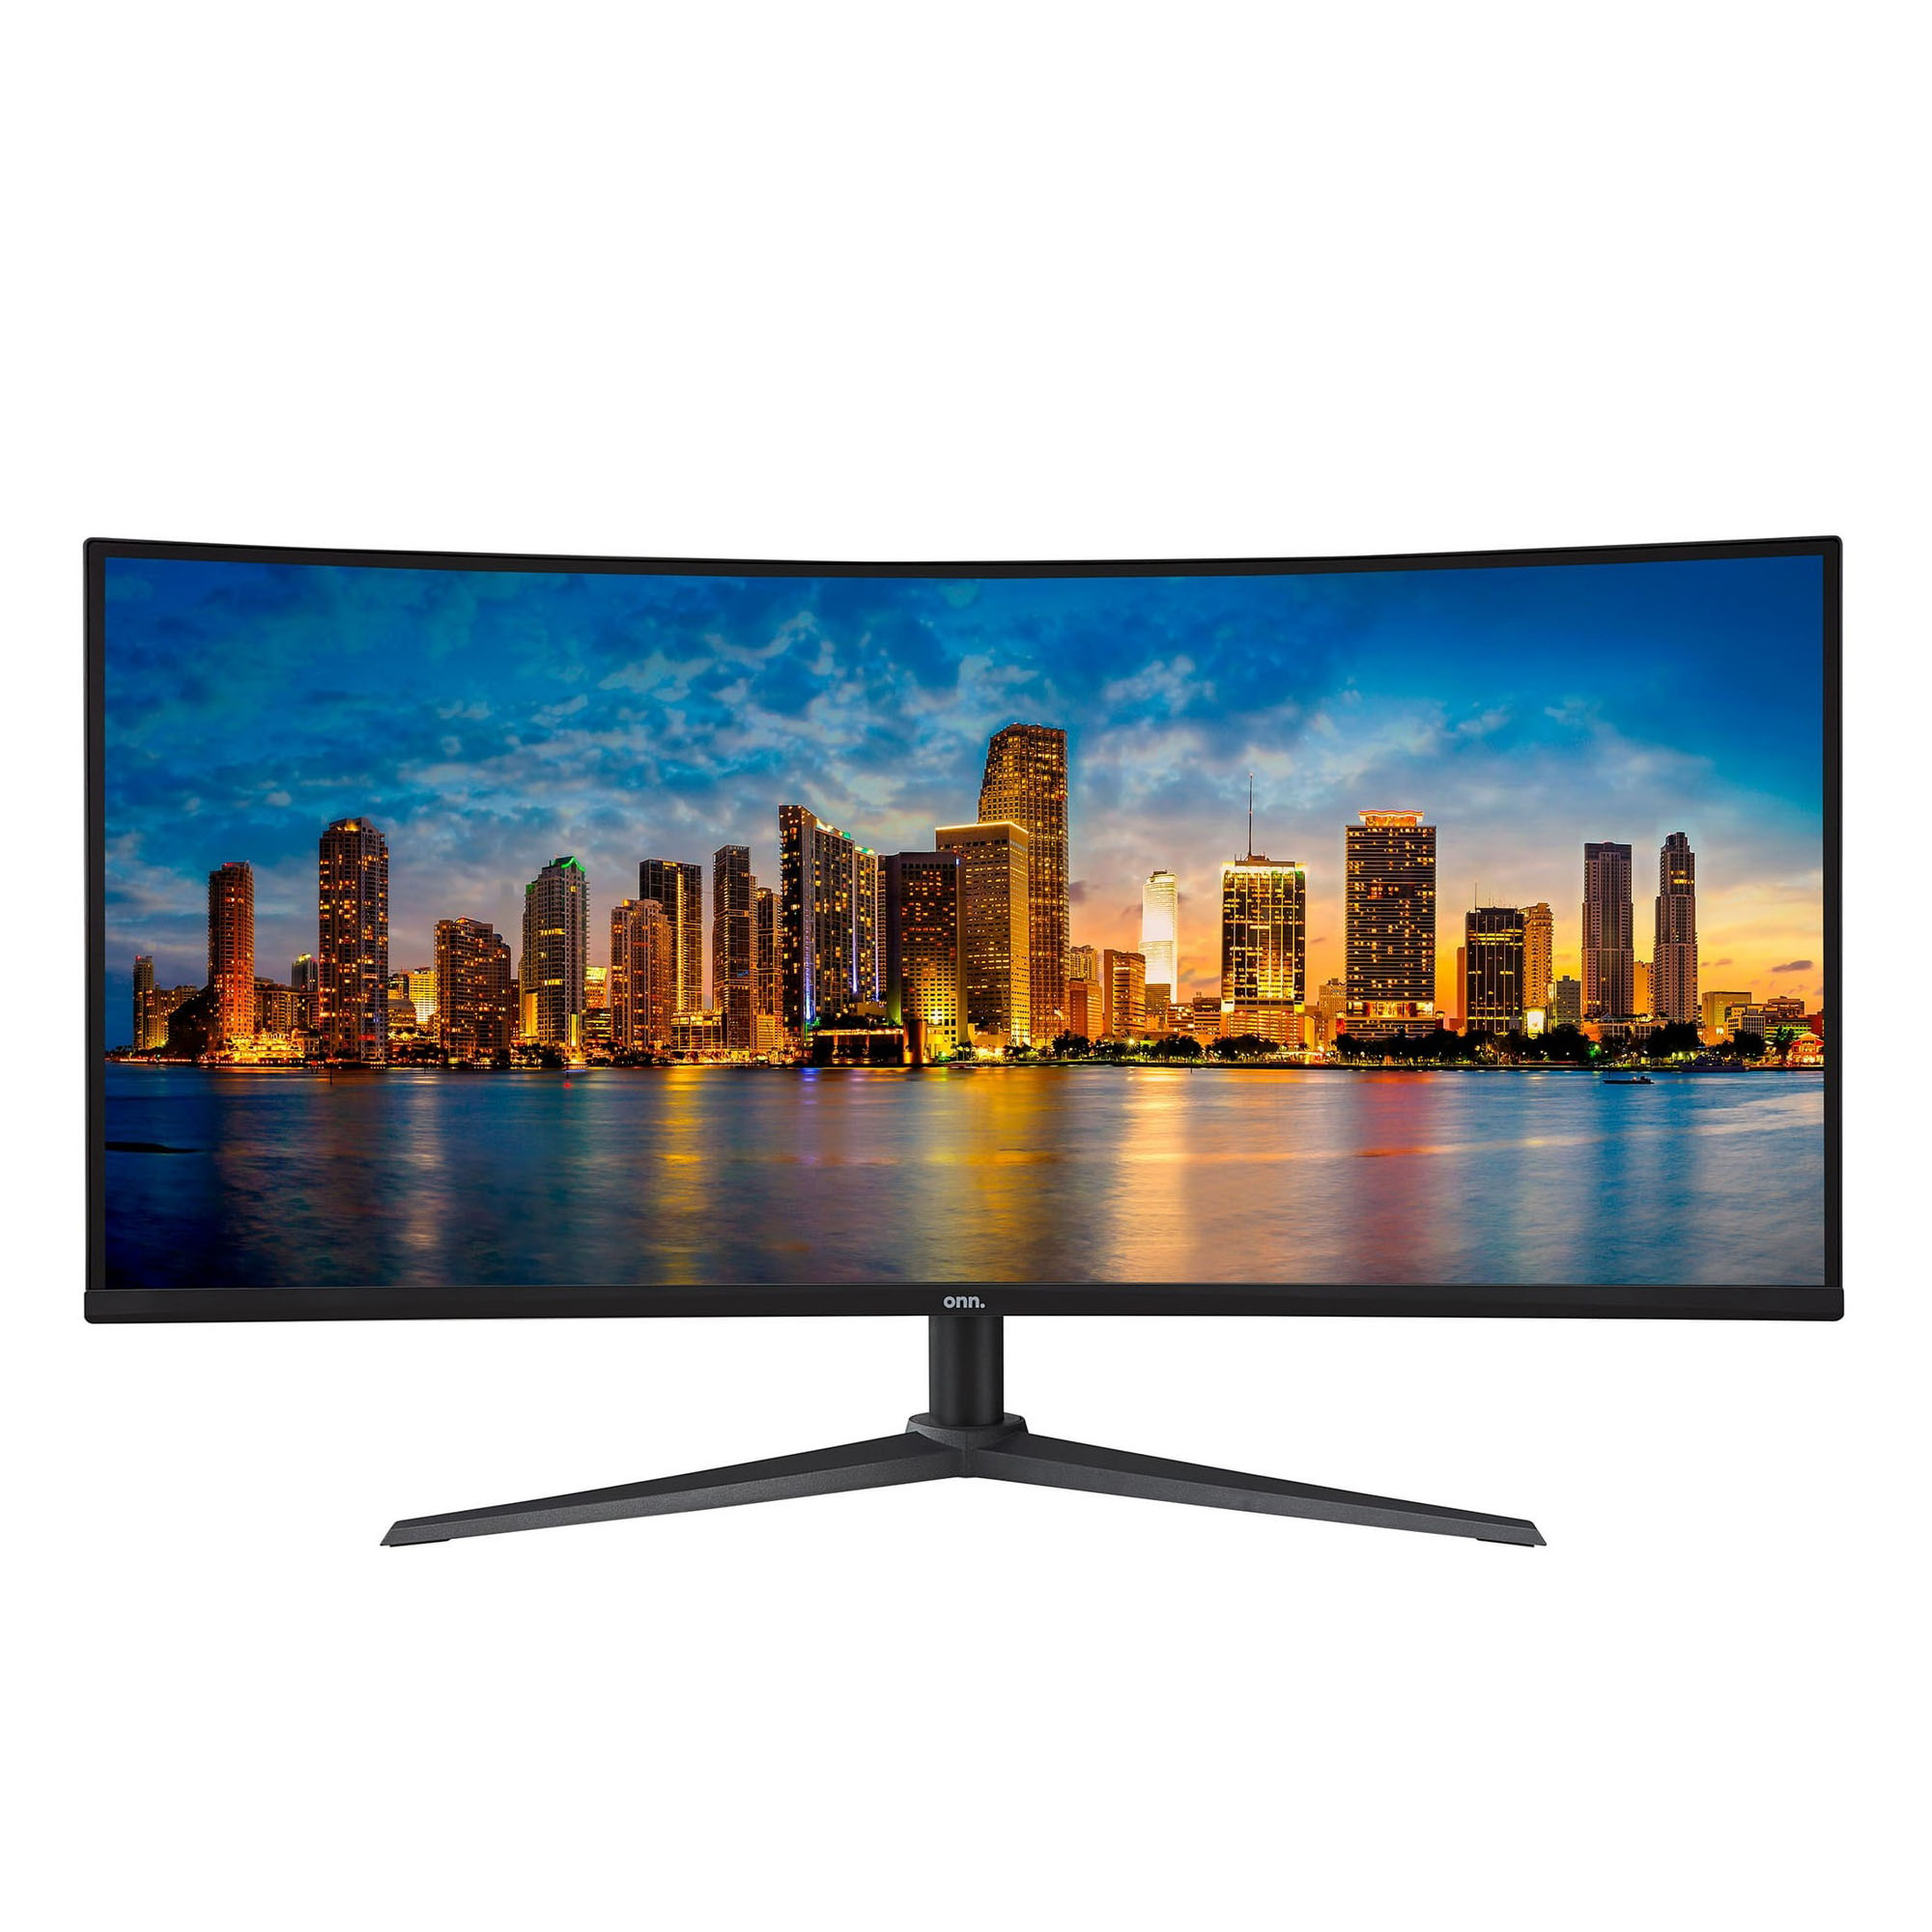 onn. 34" Curved Ultrawide WQHD (3440 x 1440p) 100Hz Bezel-Less Office Monitor with Cable, Black - image 1 of 9